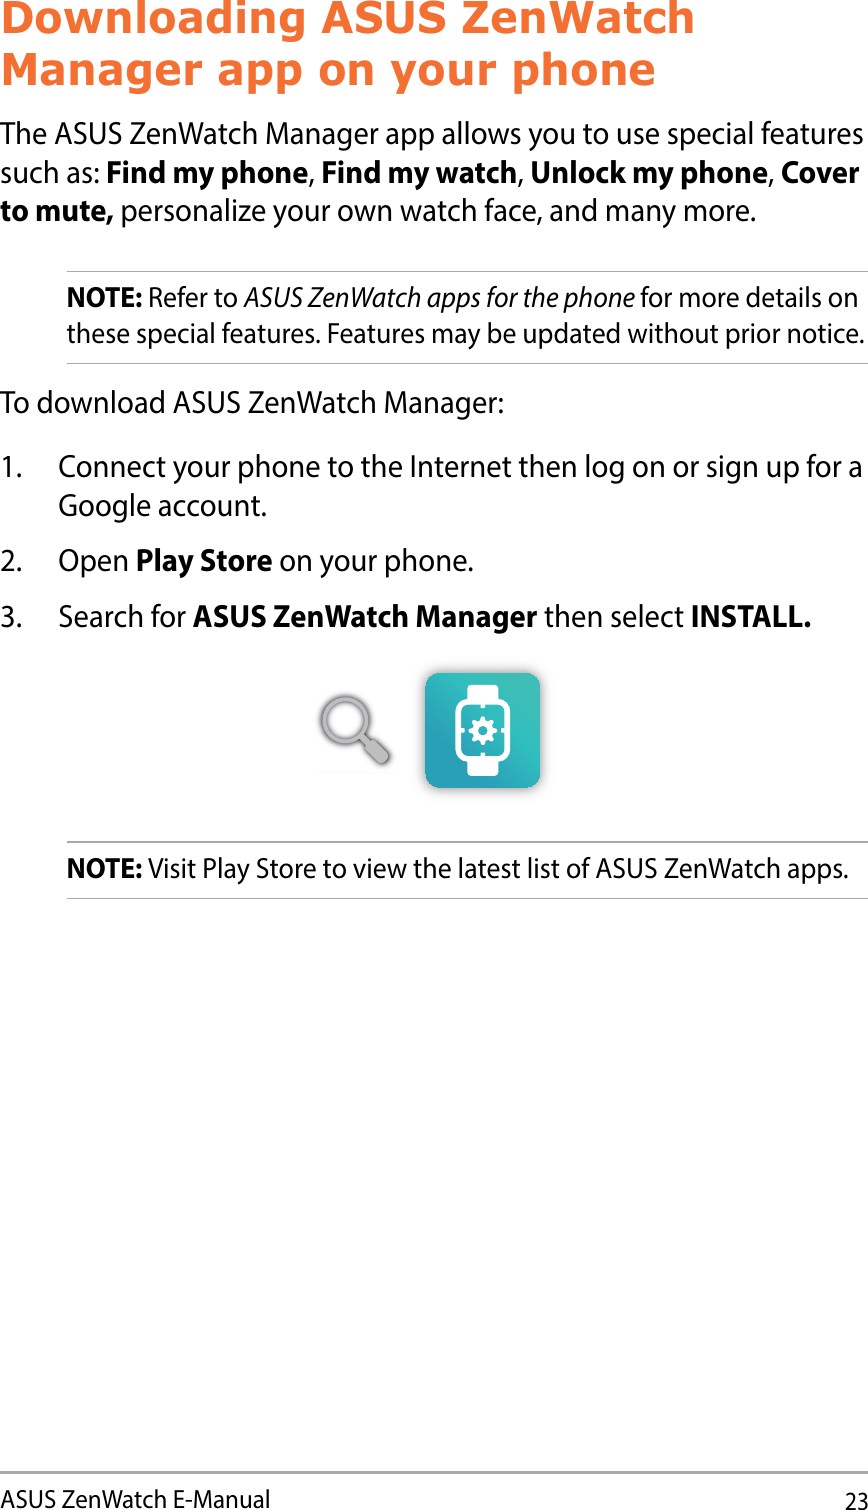 23ASUS ZenWatch E-ManualDownloading ASUS ZenWatch Manager app on your phoneThe ASUS ZenWatch Manager app allows you to use special features such as: Find my phone, Find my watch, Unlock my phone, Cover to mute, personalize your own watch face, and many more. NOTE: Refer to ASUS ZenWatch apps for the phone for more details on these special features. Features may be updated without prior notice.To download ASUS ZenWatch Manager:1.  Connect your phone to the Internet then log on or sign up for a Google account.2. Open Play Store on your phone.3. Search for ASUS ZenWatch Manager then select INSTALL.NOTE: Visit Play Store to view the latest list of ASUS ZenWatch apps.